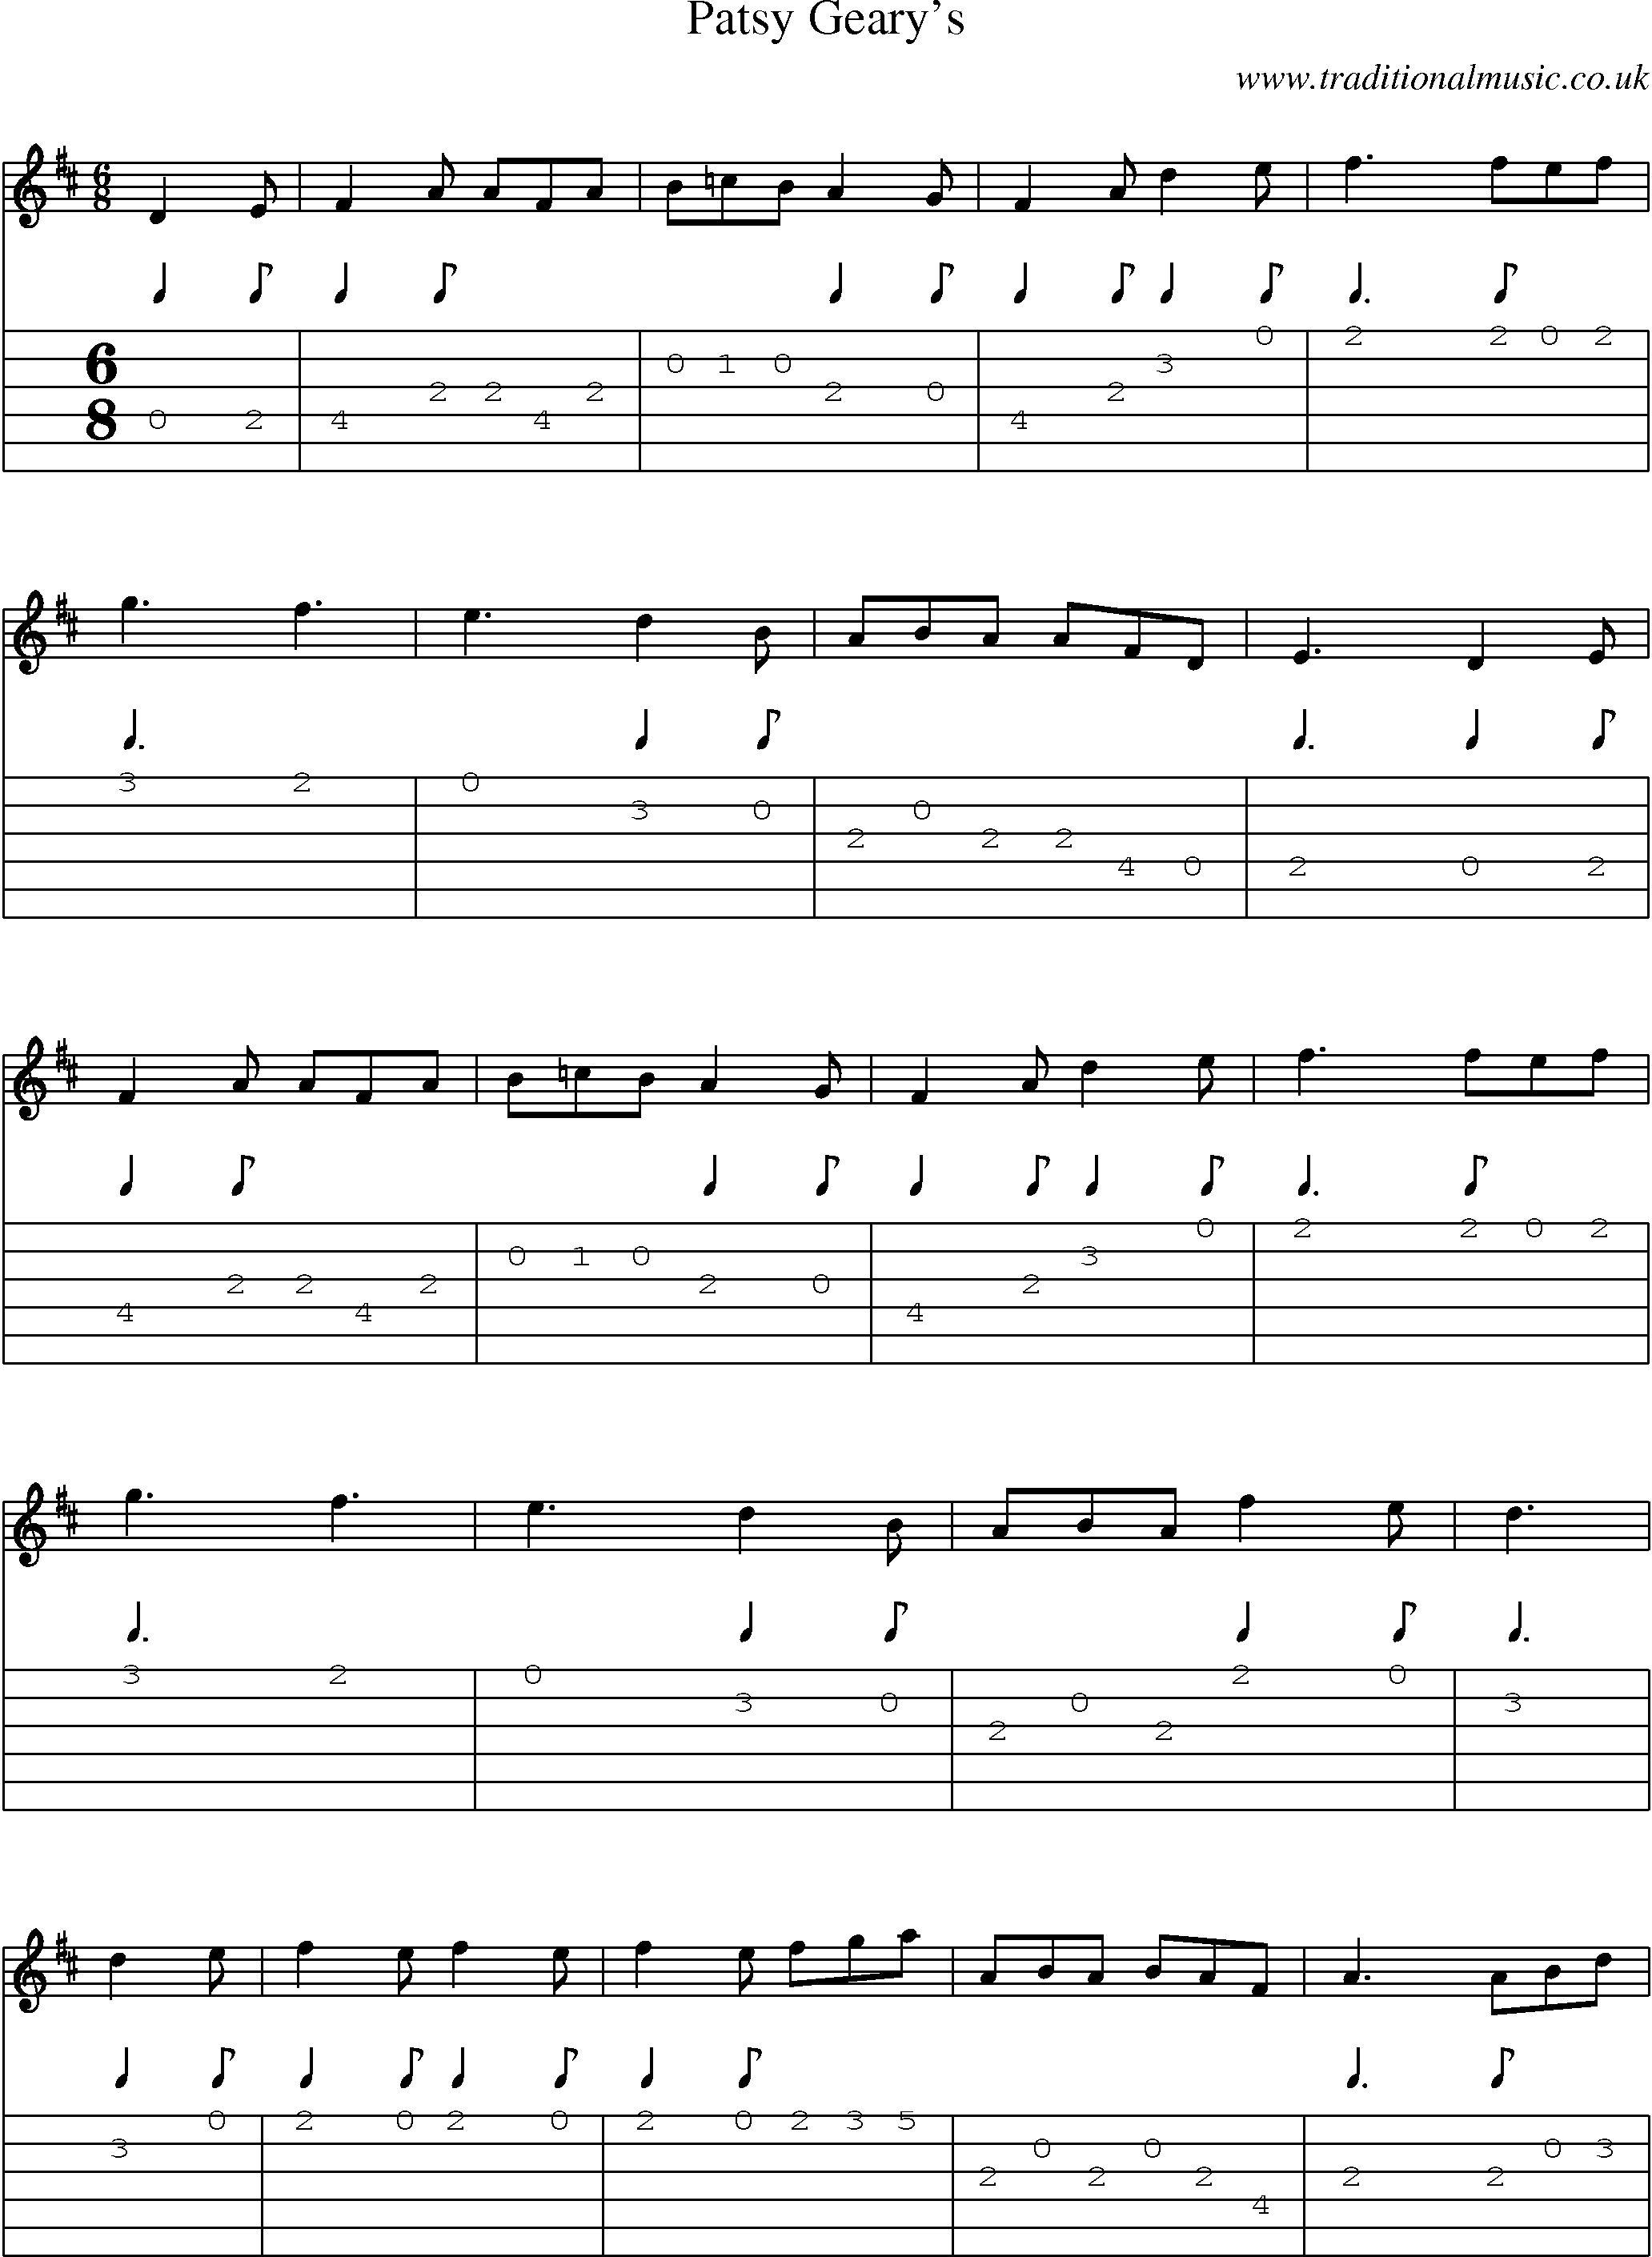 Music Score and Guitar Tabs for Patsy Gearys